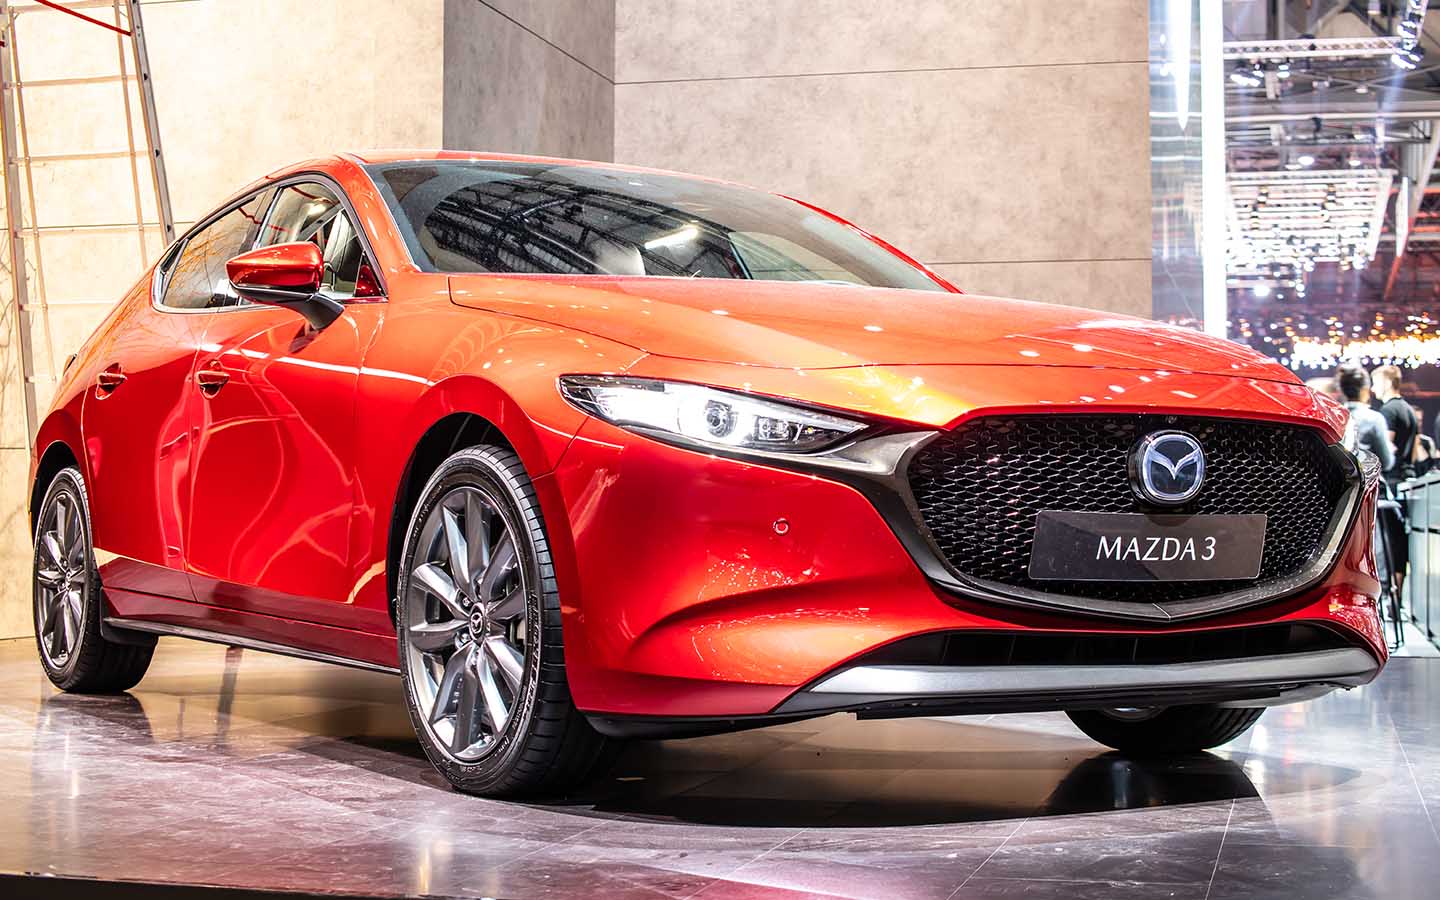 Mazda 3 ranks second on the list of top used Mazda cars in the UAE